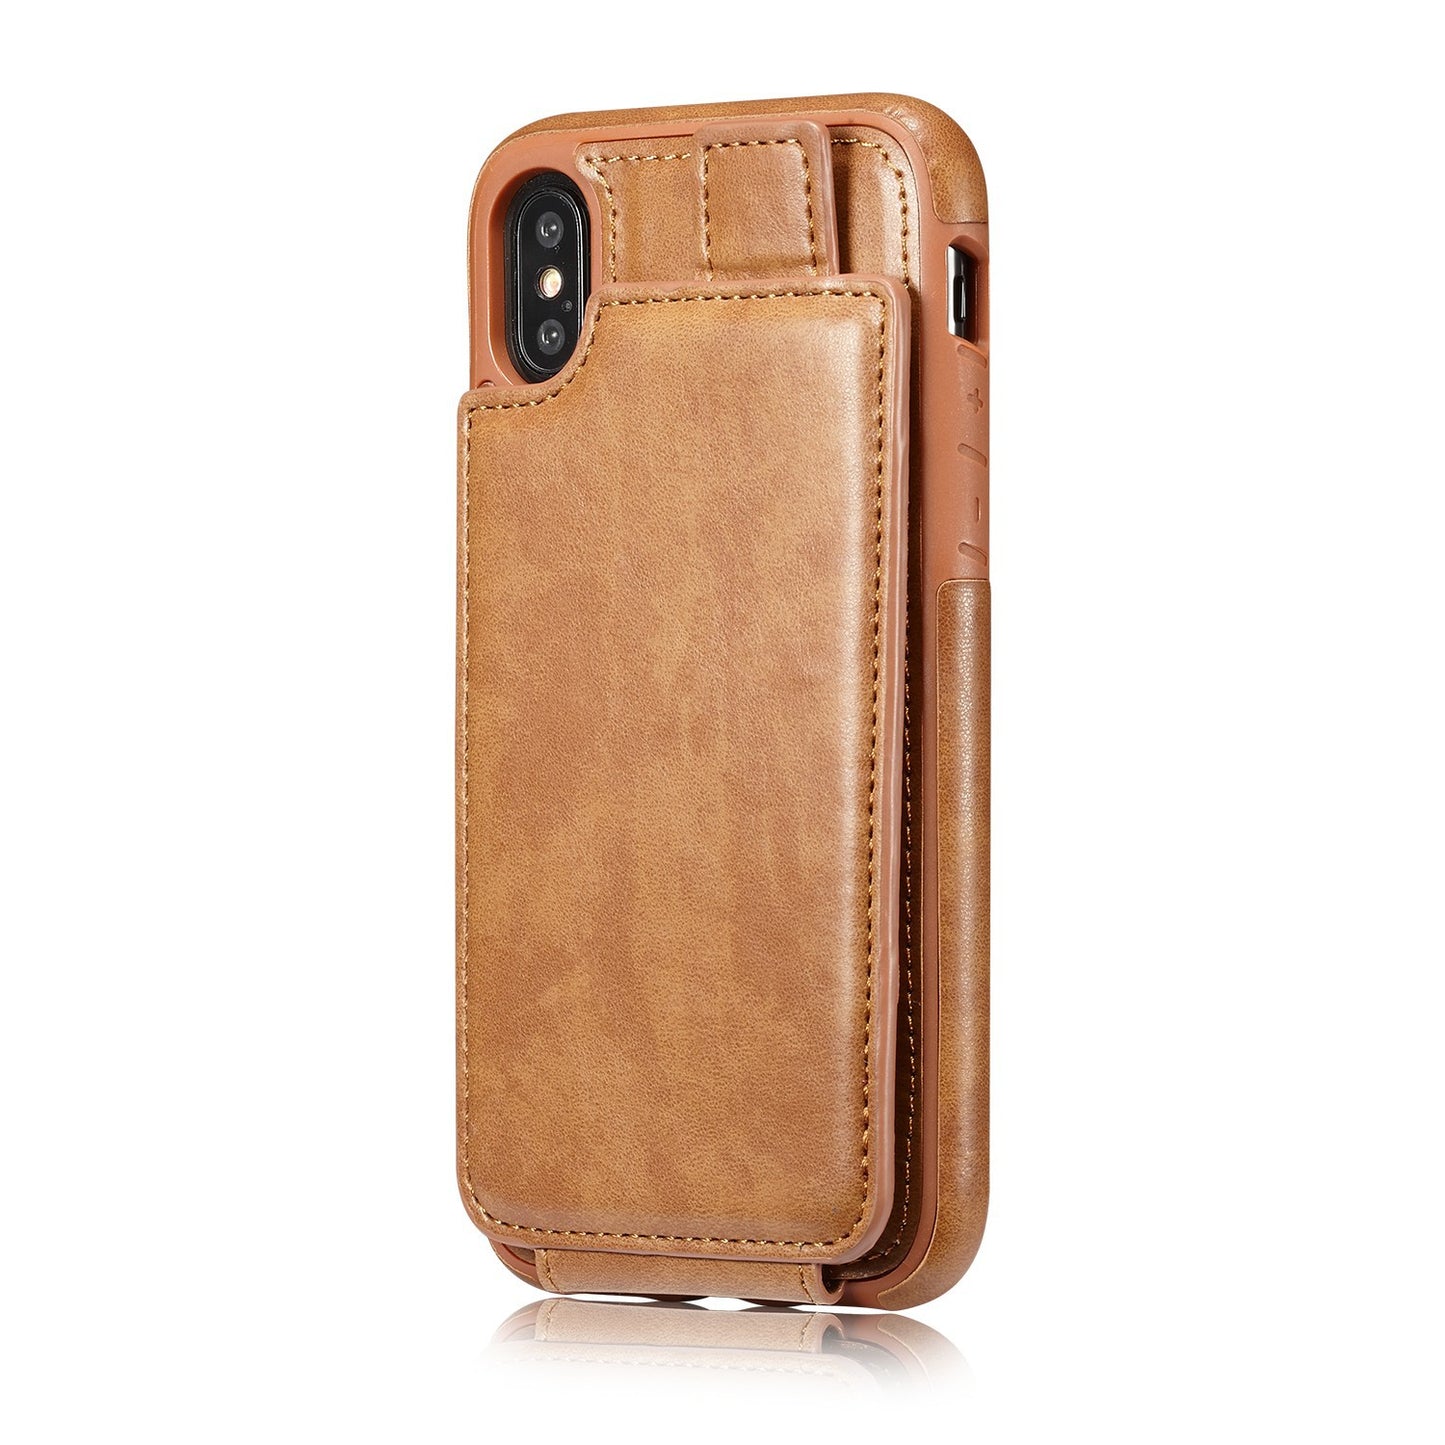 Compatible With AppleIPhone X Multifunction Wallet Mobile Phone Leather Jacket Wallet Mobile Phone Set10 X Protection Cover